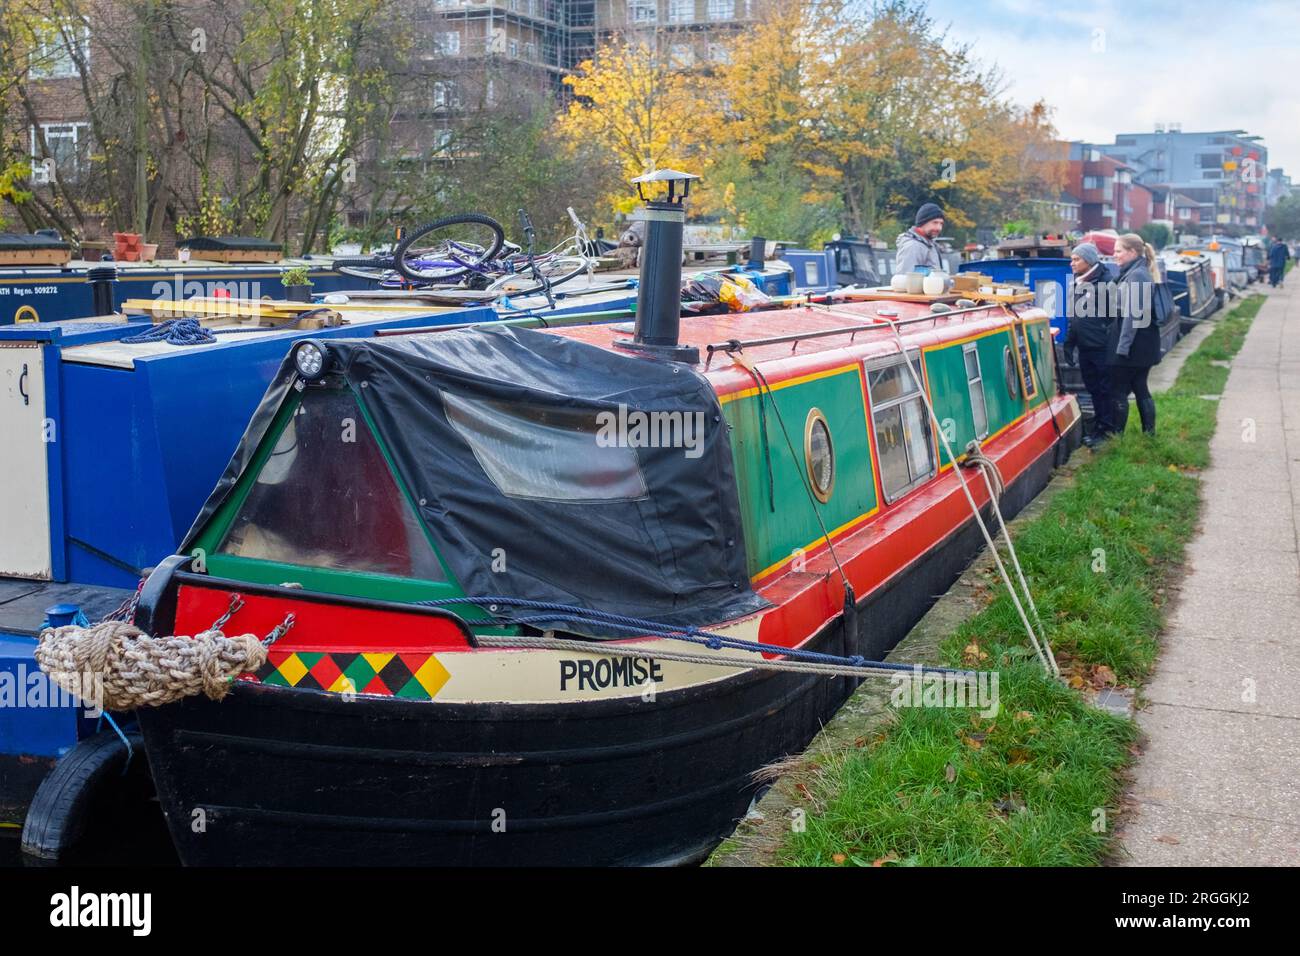 Off grid living on a Barge, Hackney, London, UK Stock Photo